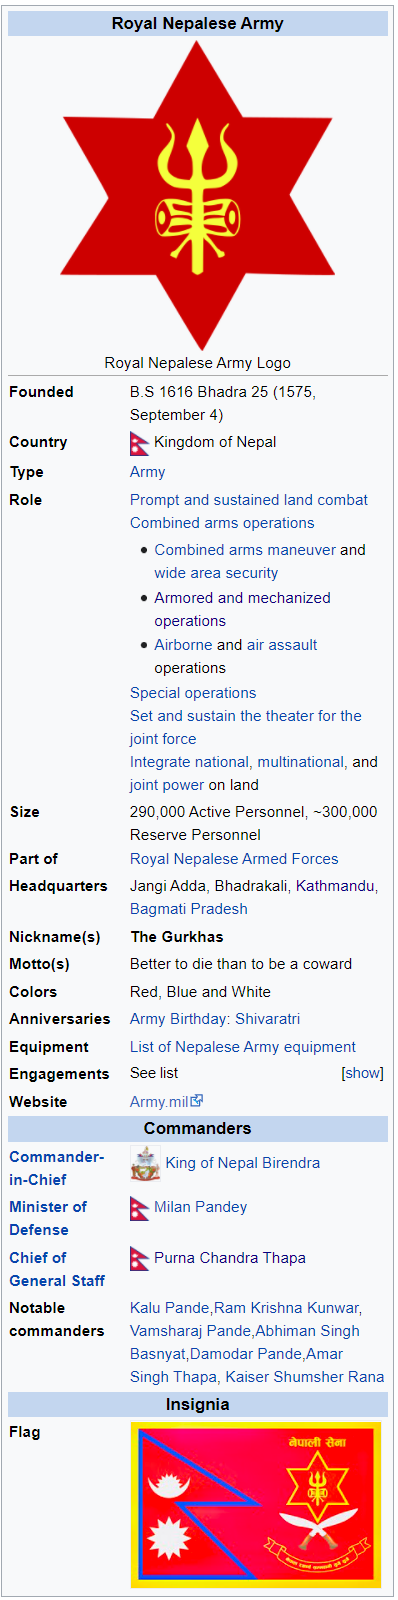 Royal Nepalese Army.png